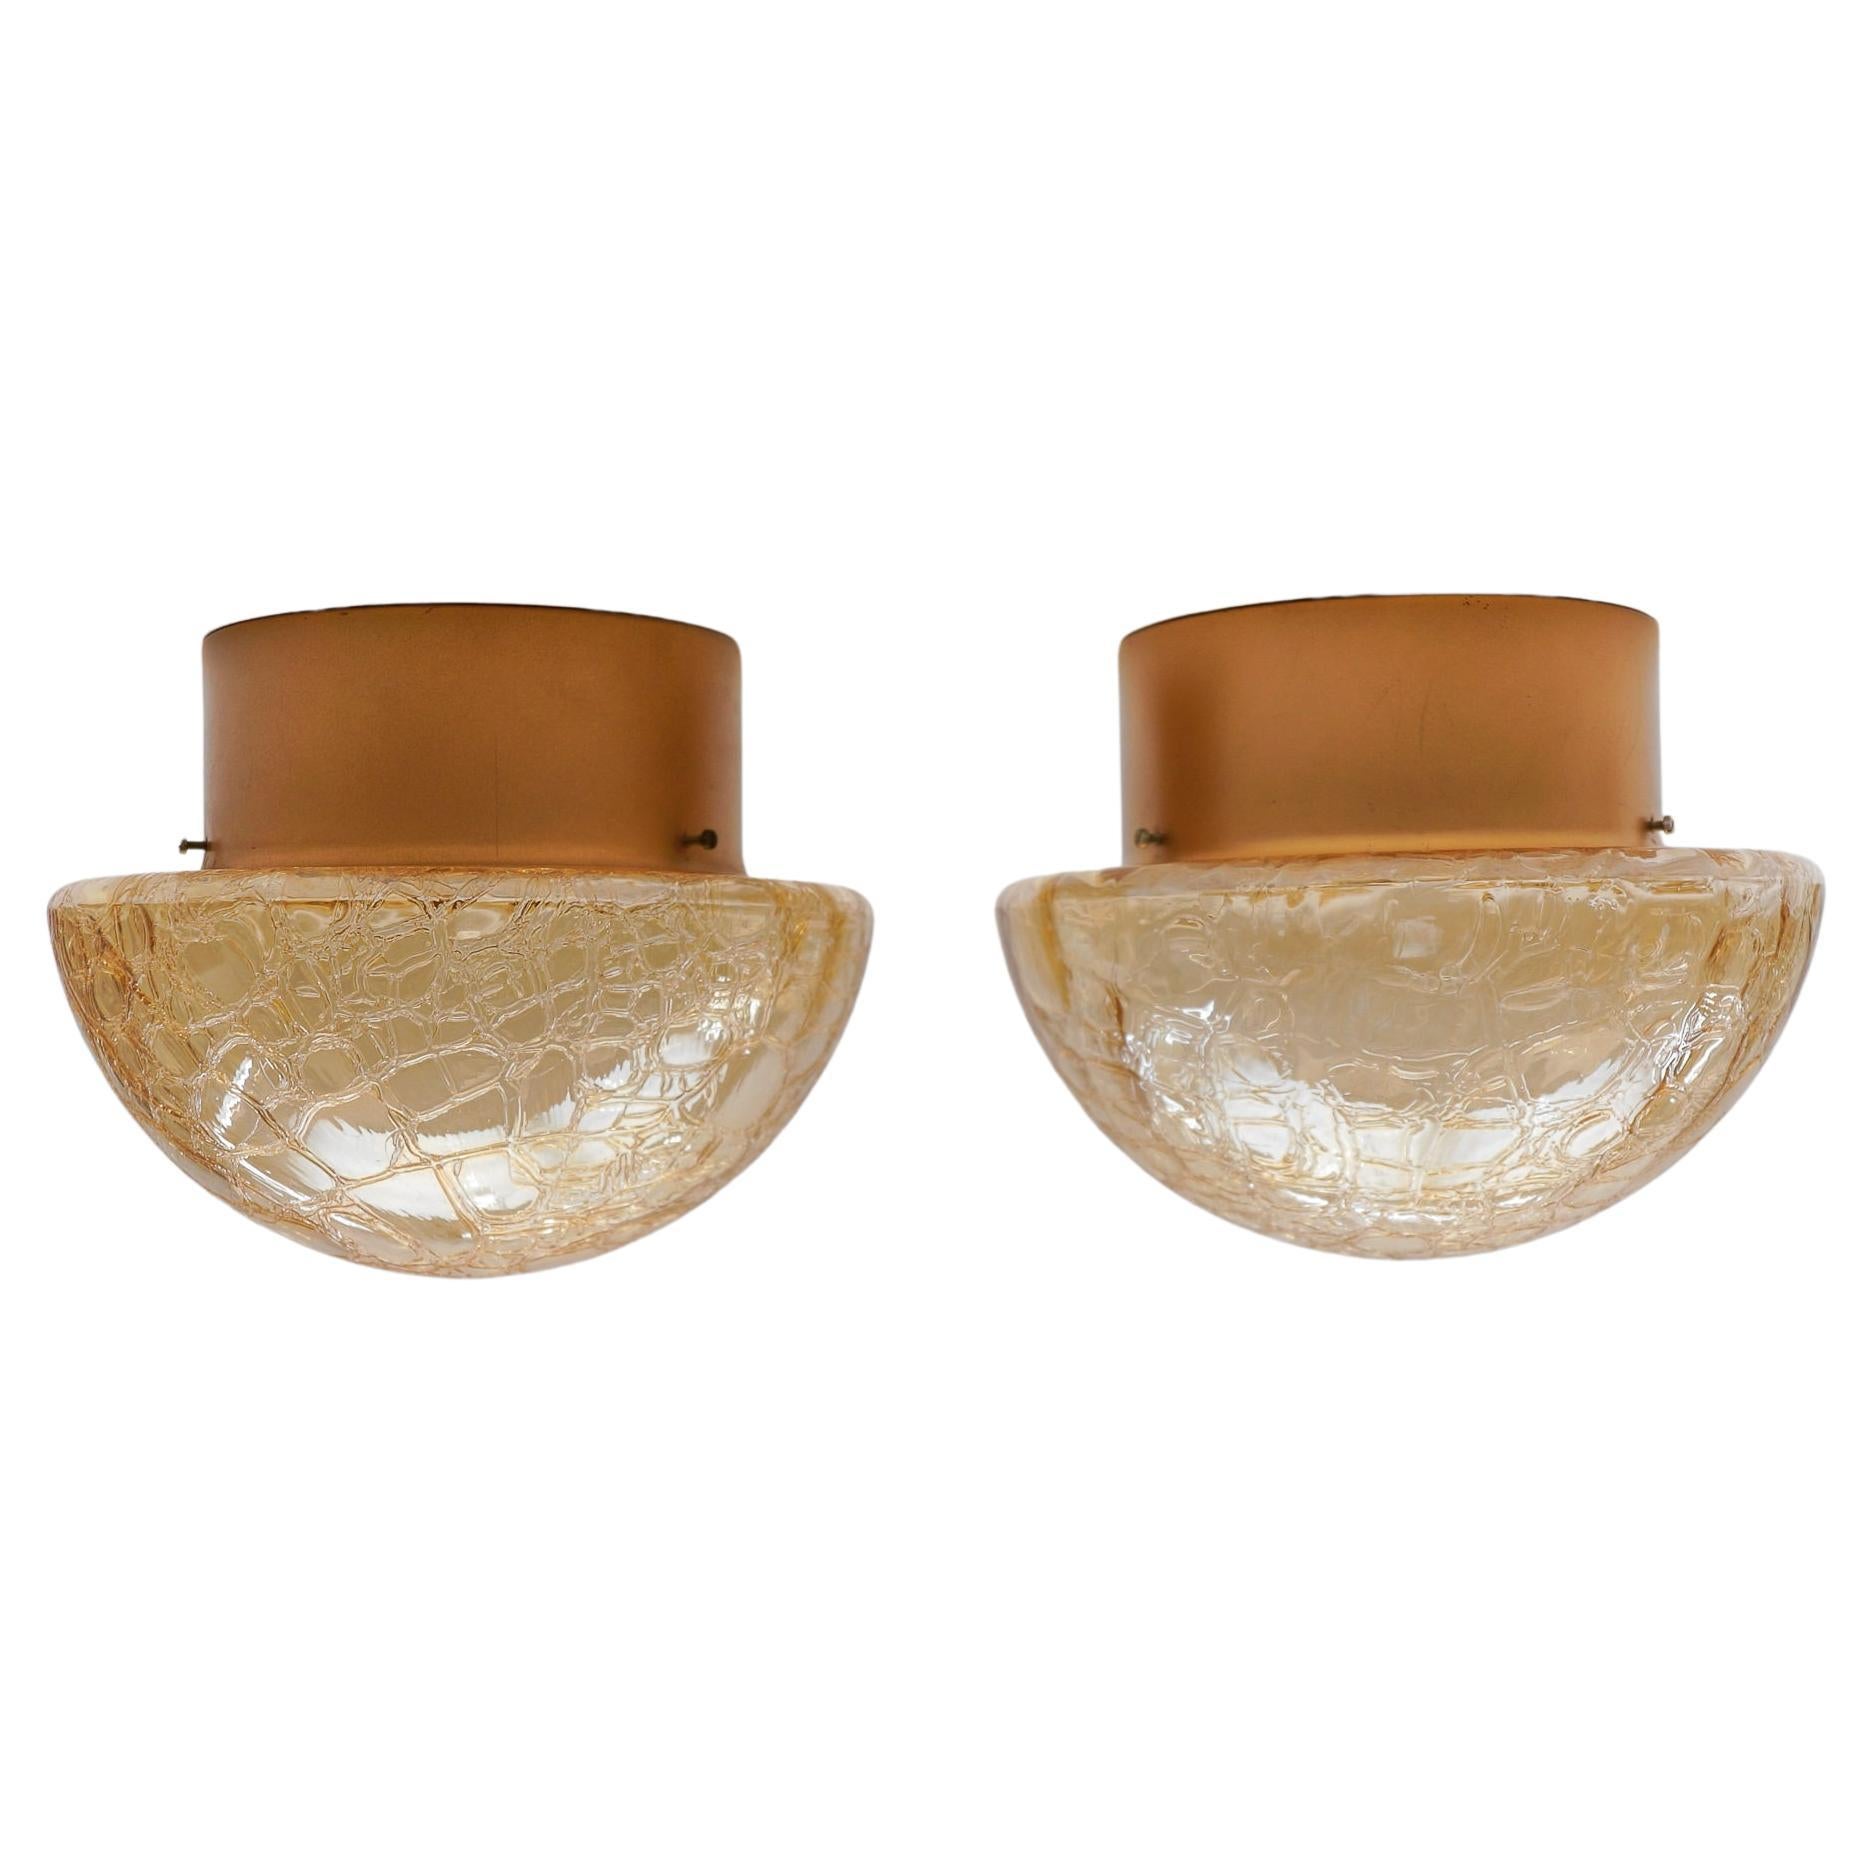 Pair of Amber Gold Mushroom Shaped Wall Lamps / Flush Mount Lights, 1960s